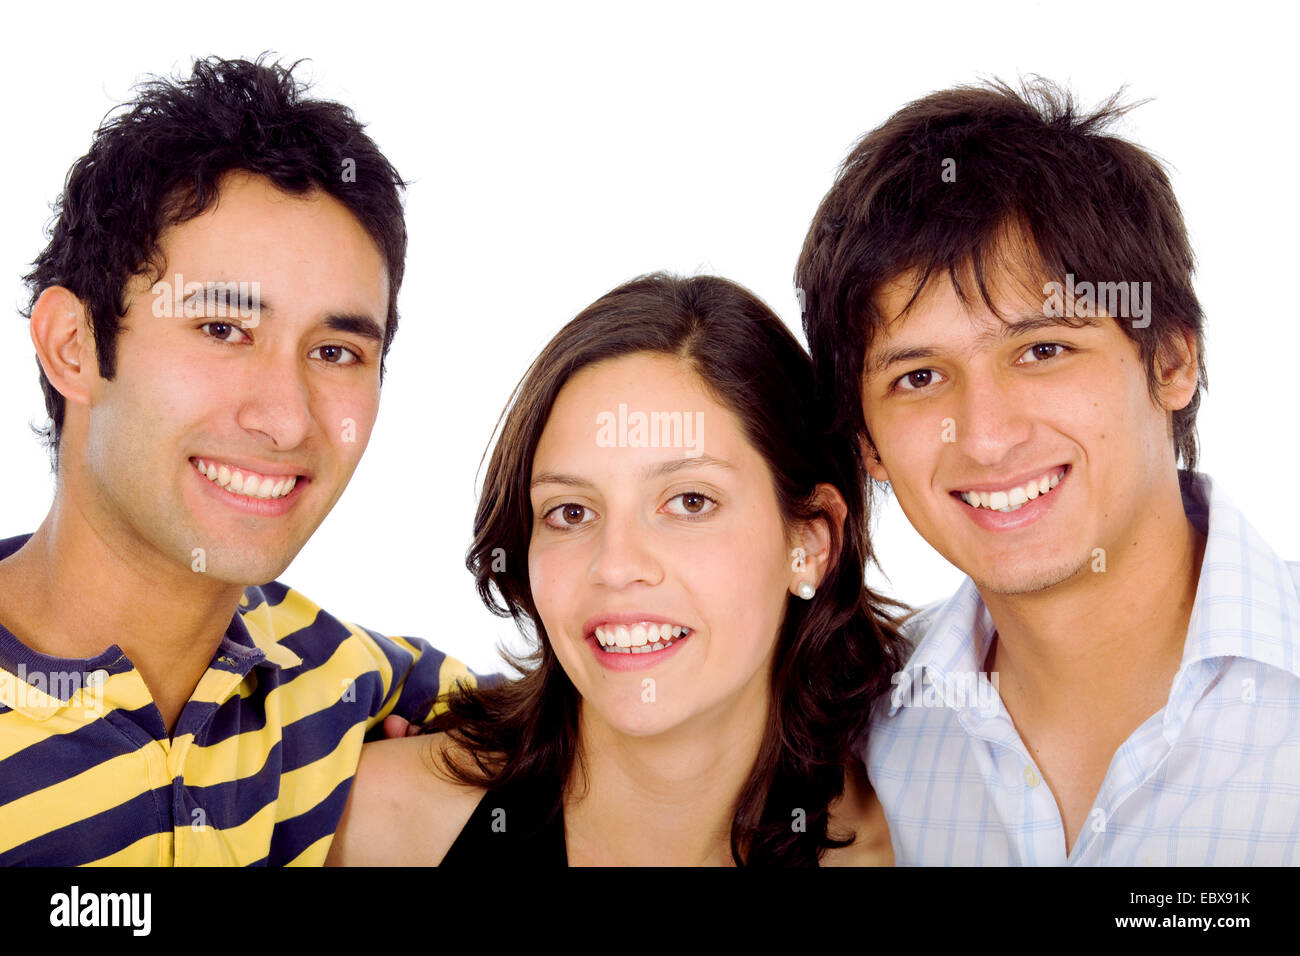 group of friends portrait smiling Stock Photo